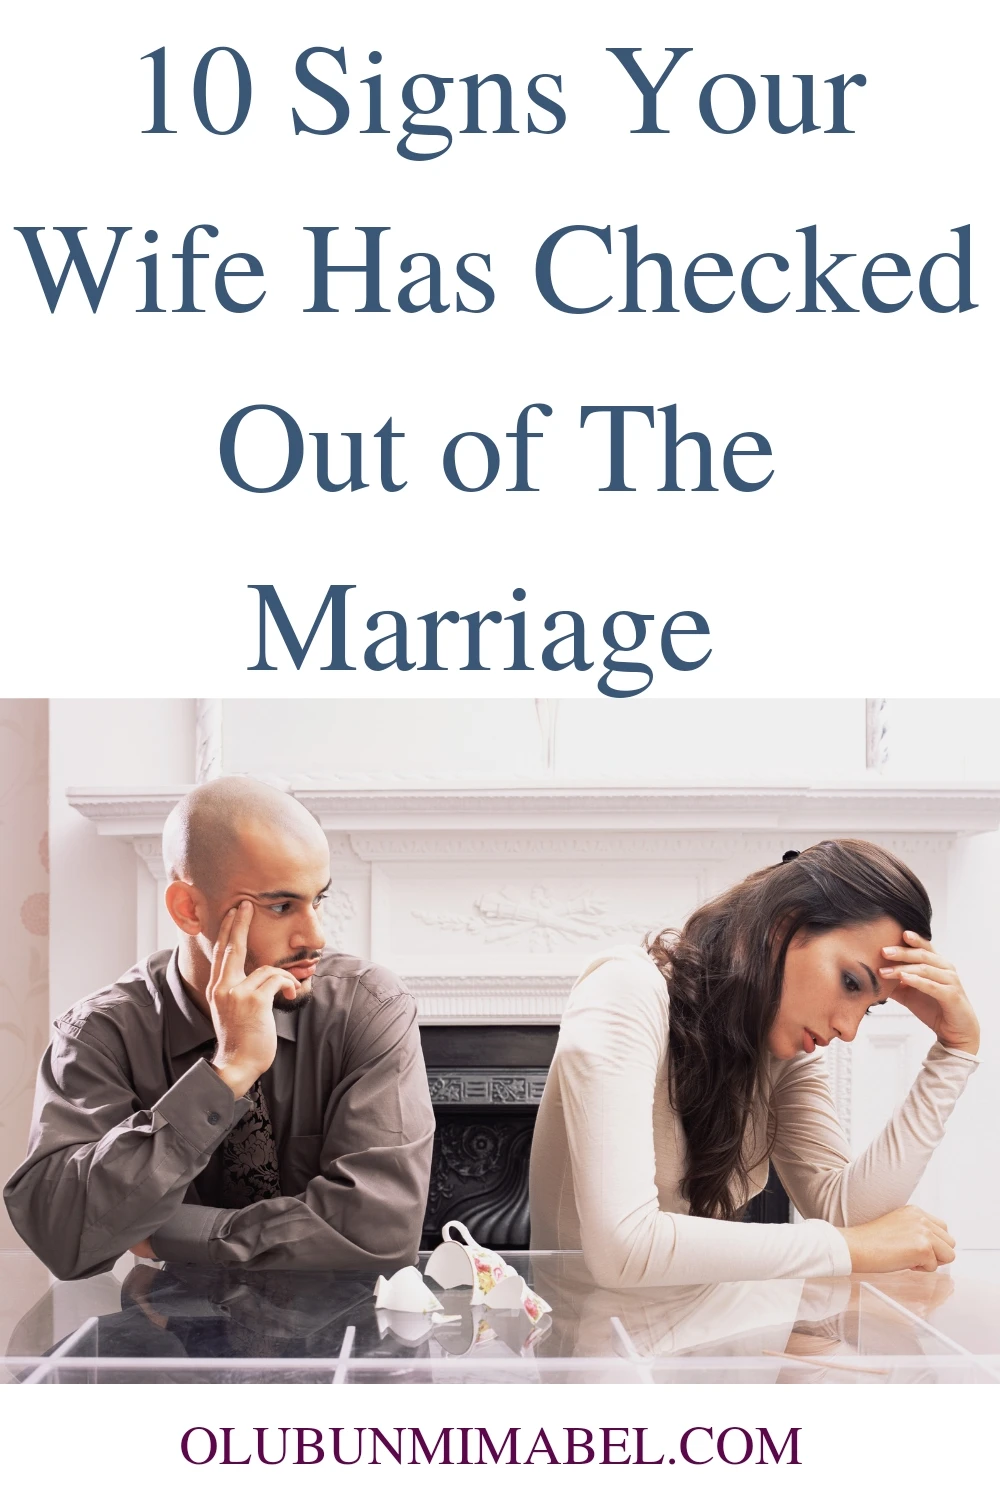 Signs Your Wife Has Checked Out of The Marriage